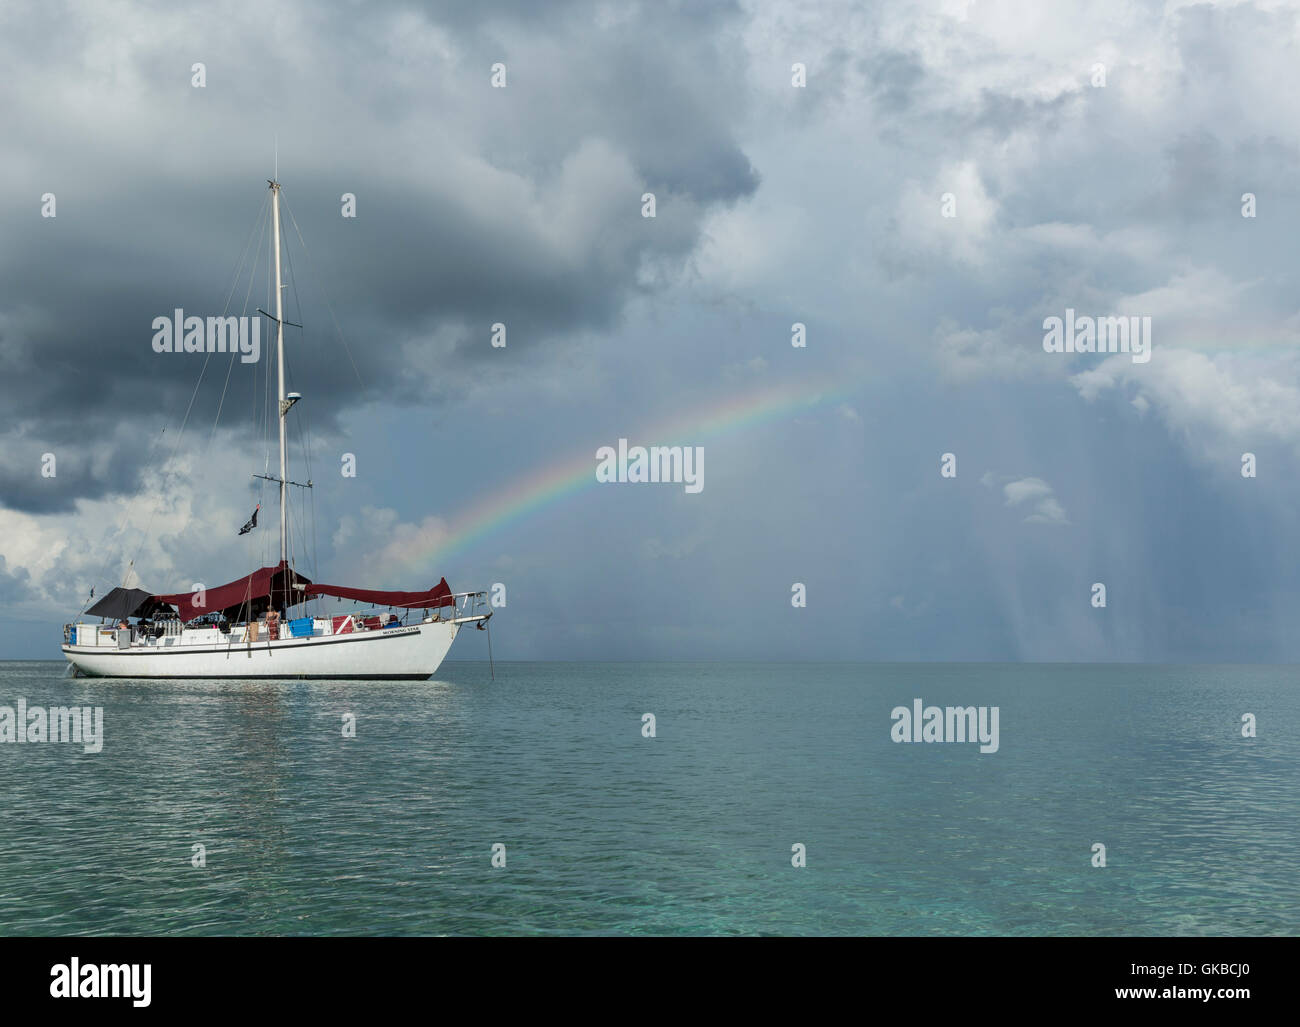 Sailboat floating in the Atlantic Ocean with a rainbow behind it Stock Photo